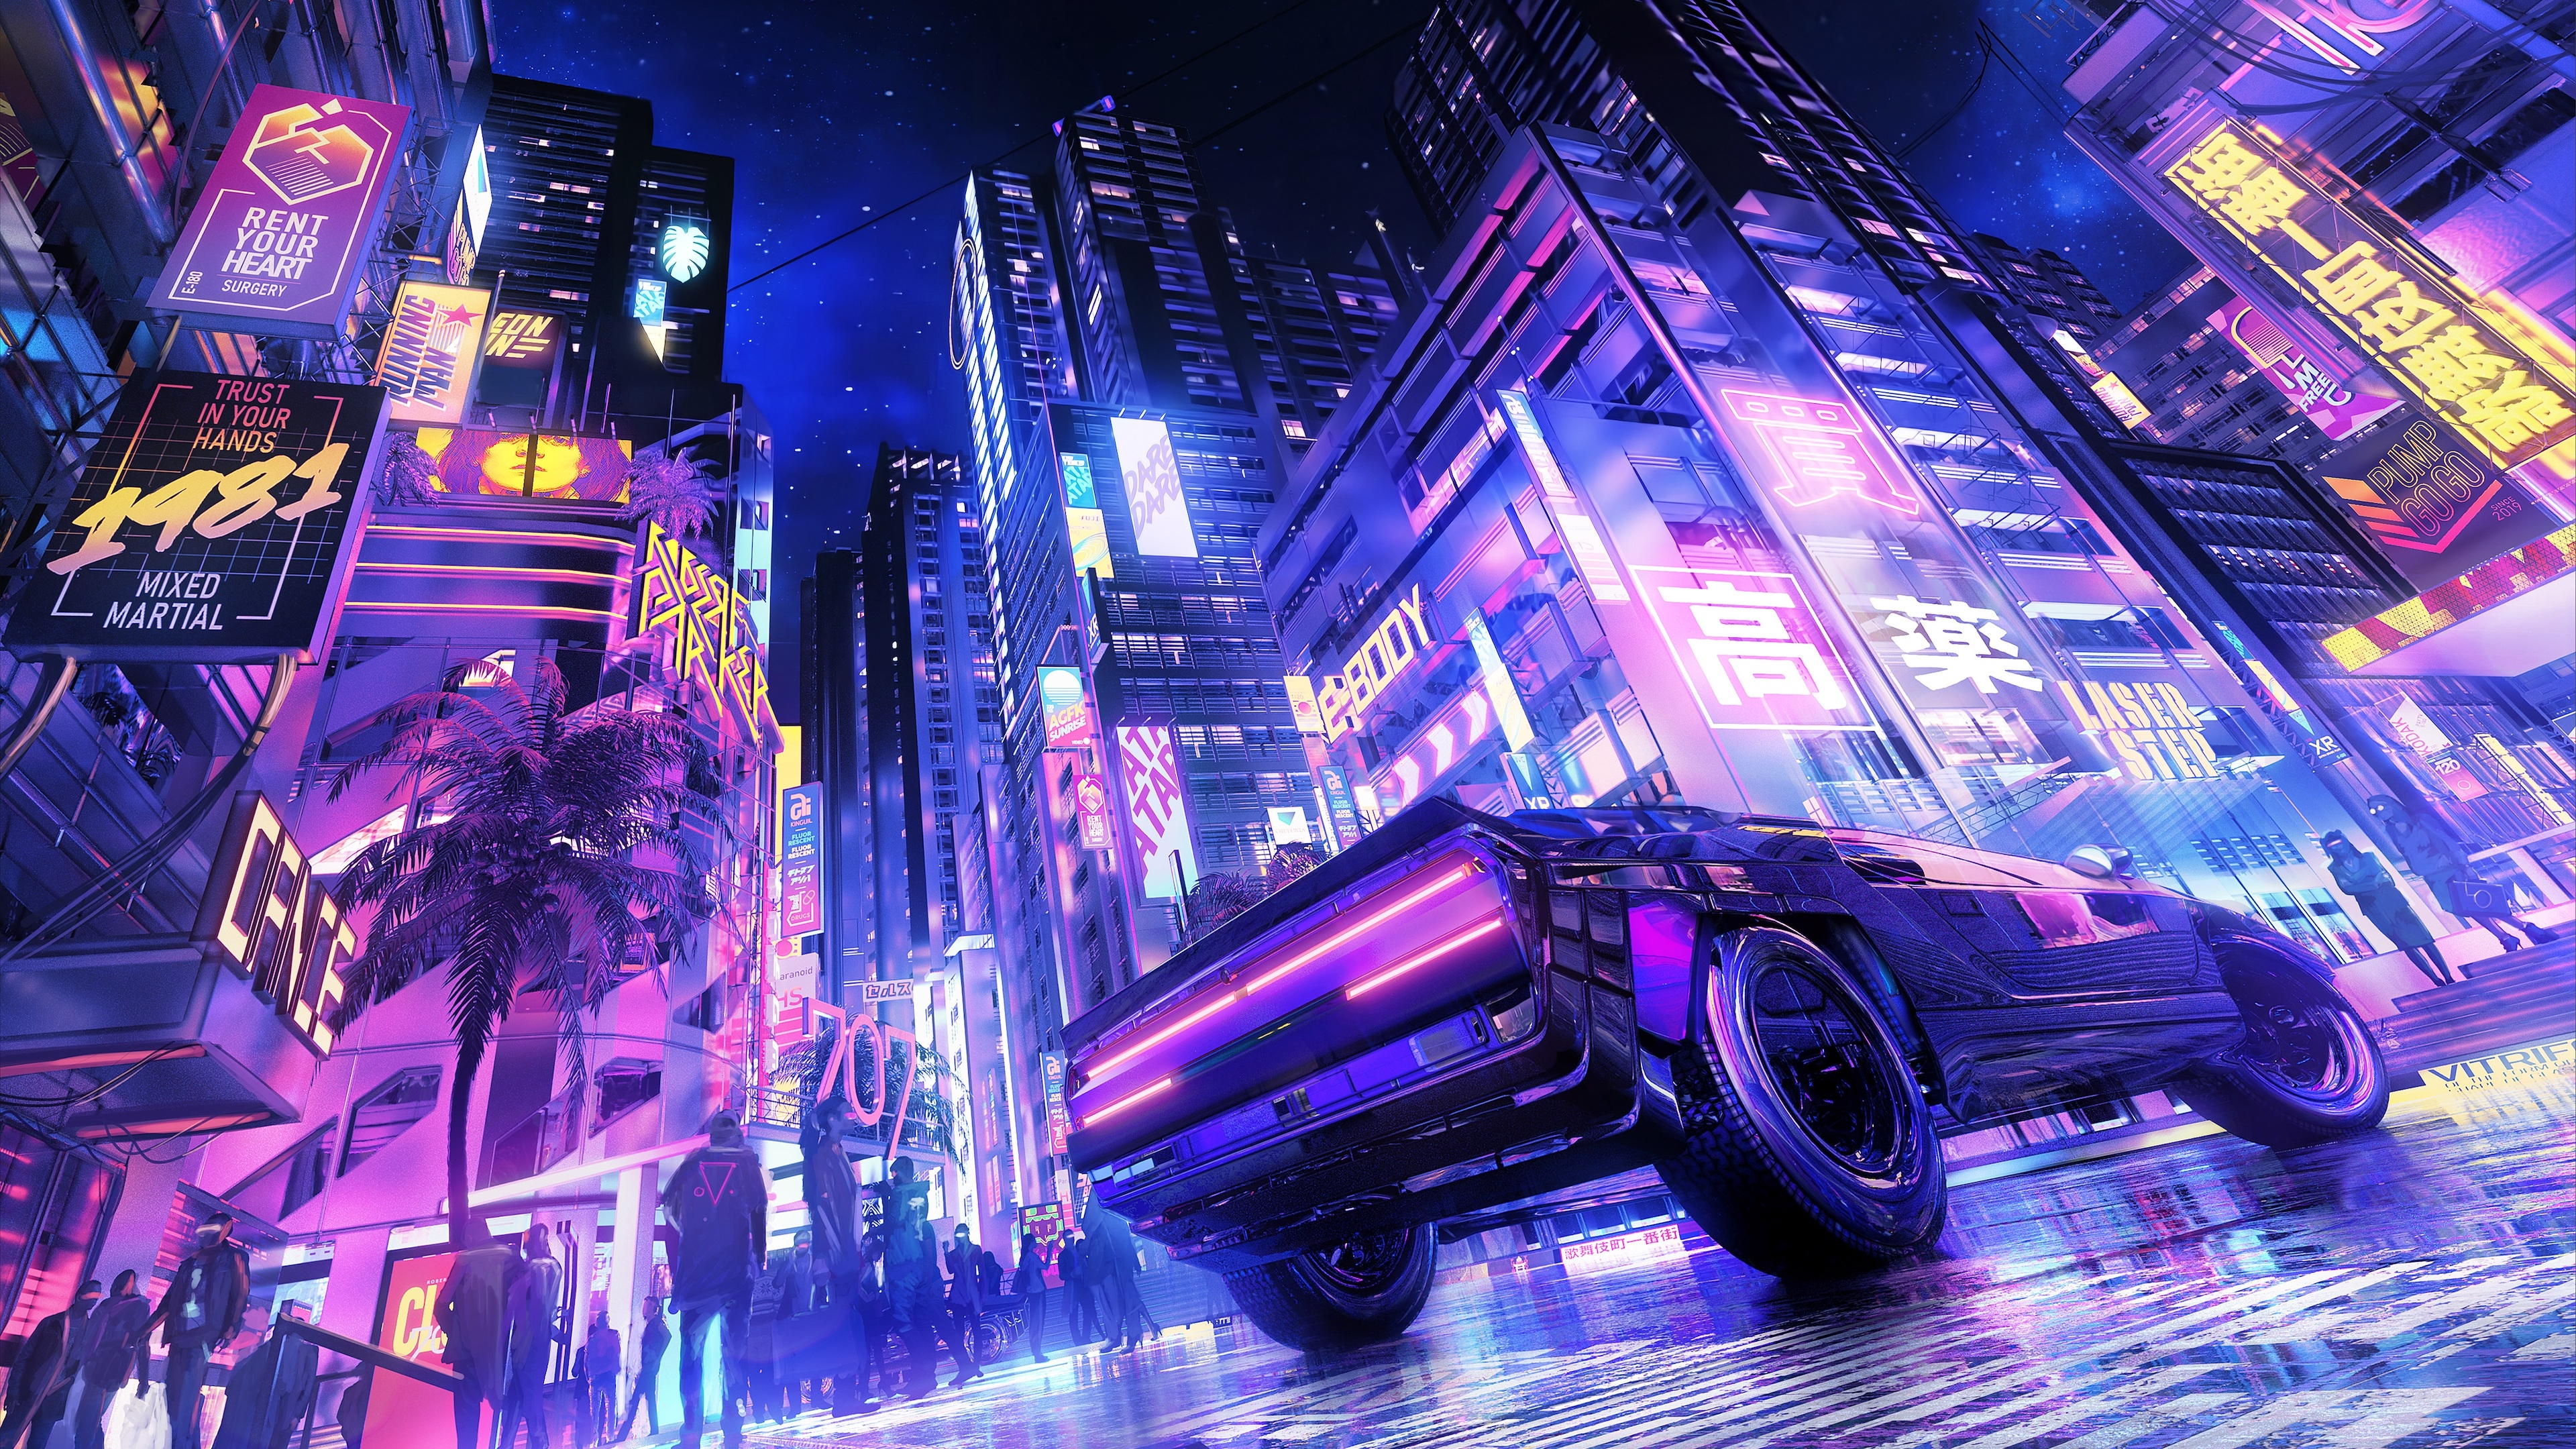 2248x224820 Futuristic Neon City HD Car Rider 2248x224820 Resolution  Wallpaper, HD Artist 4K Wallpapers, Images, Photos and Background -  Wallpapers Den